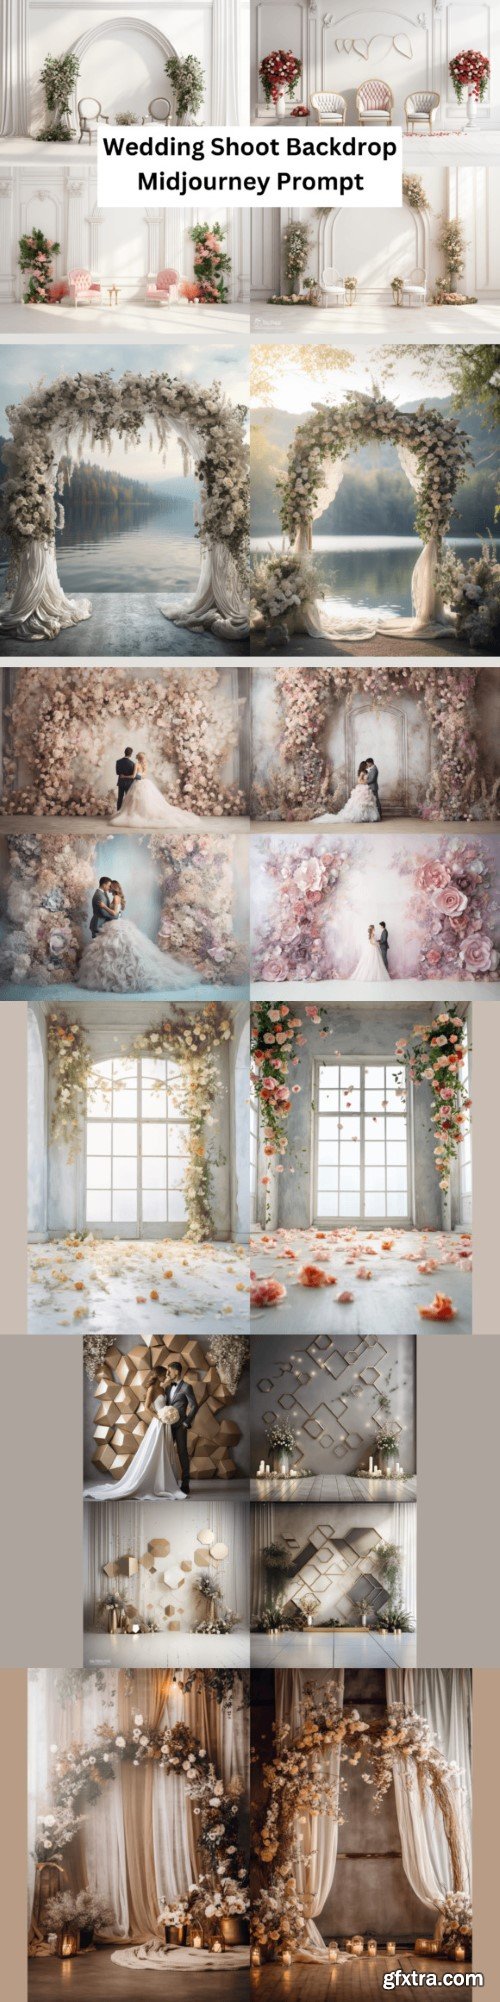 Prompt for Wedding Shoot Backdrop